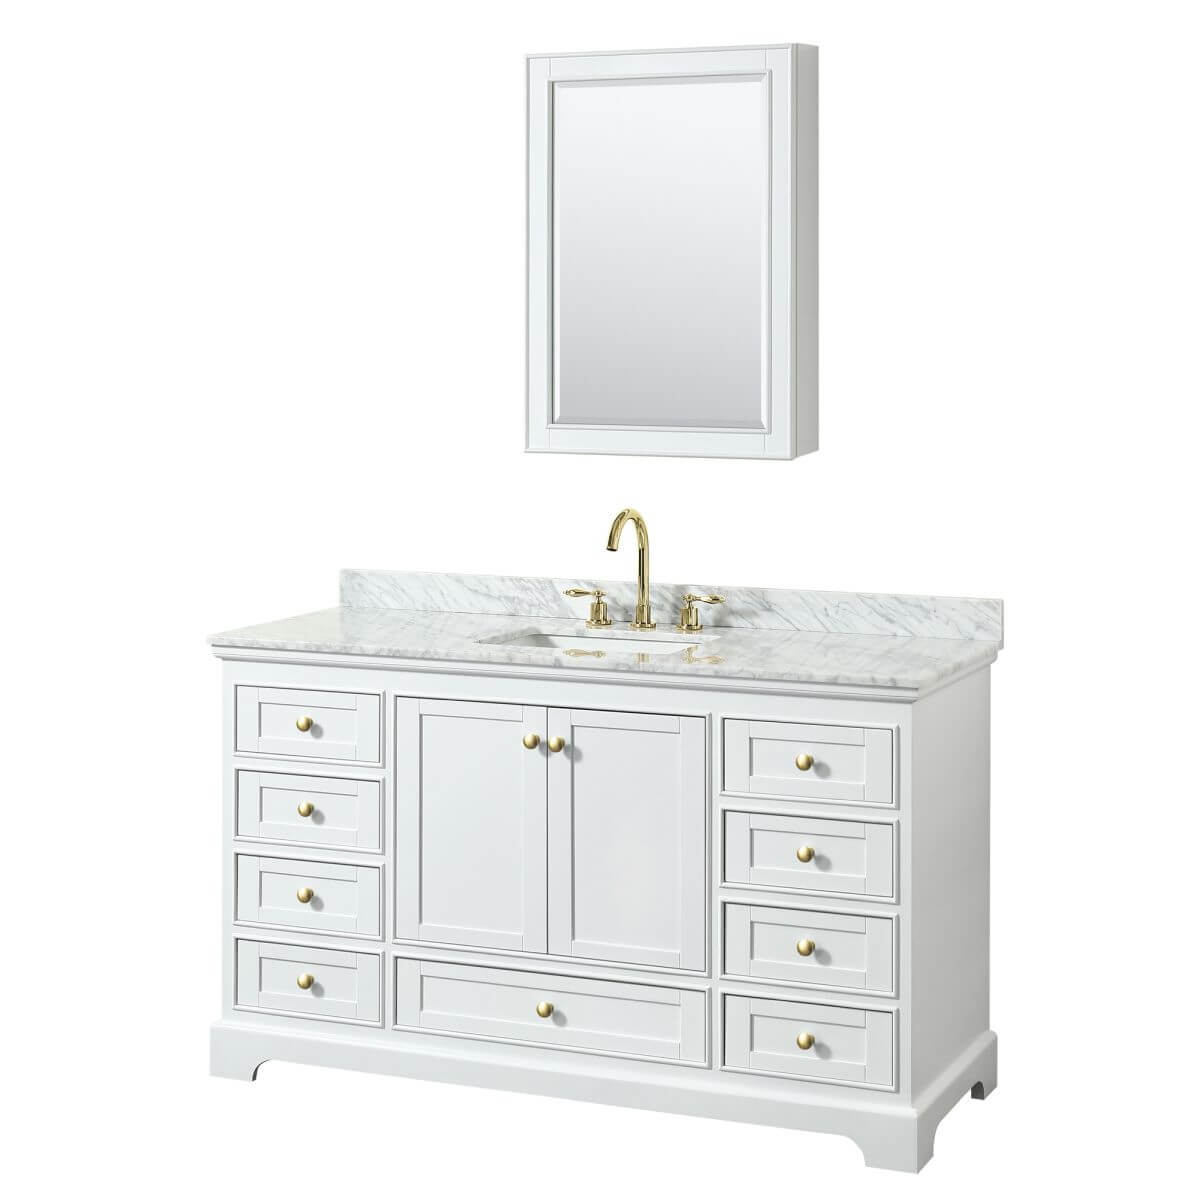 Wyndham Collection Deborah 60 inch Single Bathroom Vanity in White with White Carrara Marble Countertop, Undermount Square Sink, Brushed Gold Trim and Medicine Cabinet - WCS202060SWGCMUNSMED